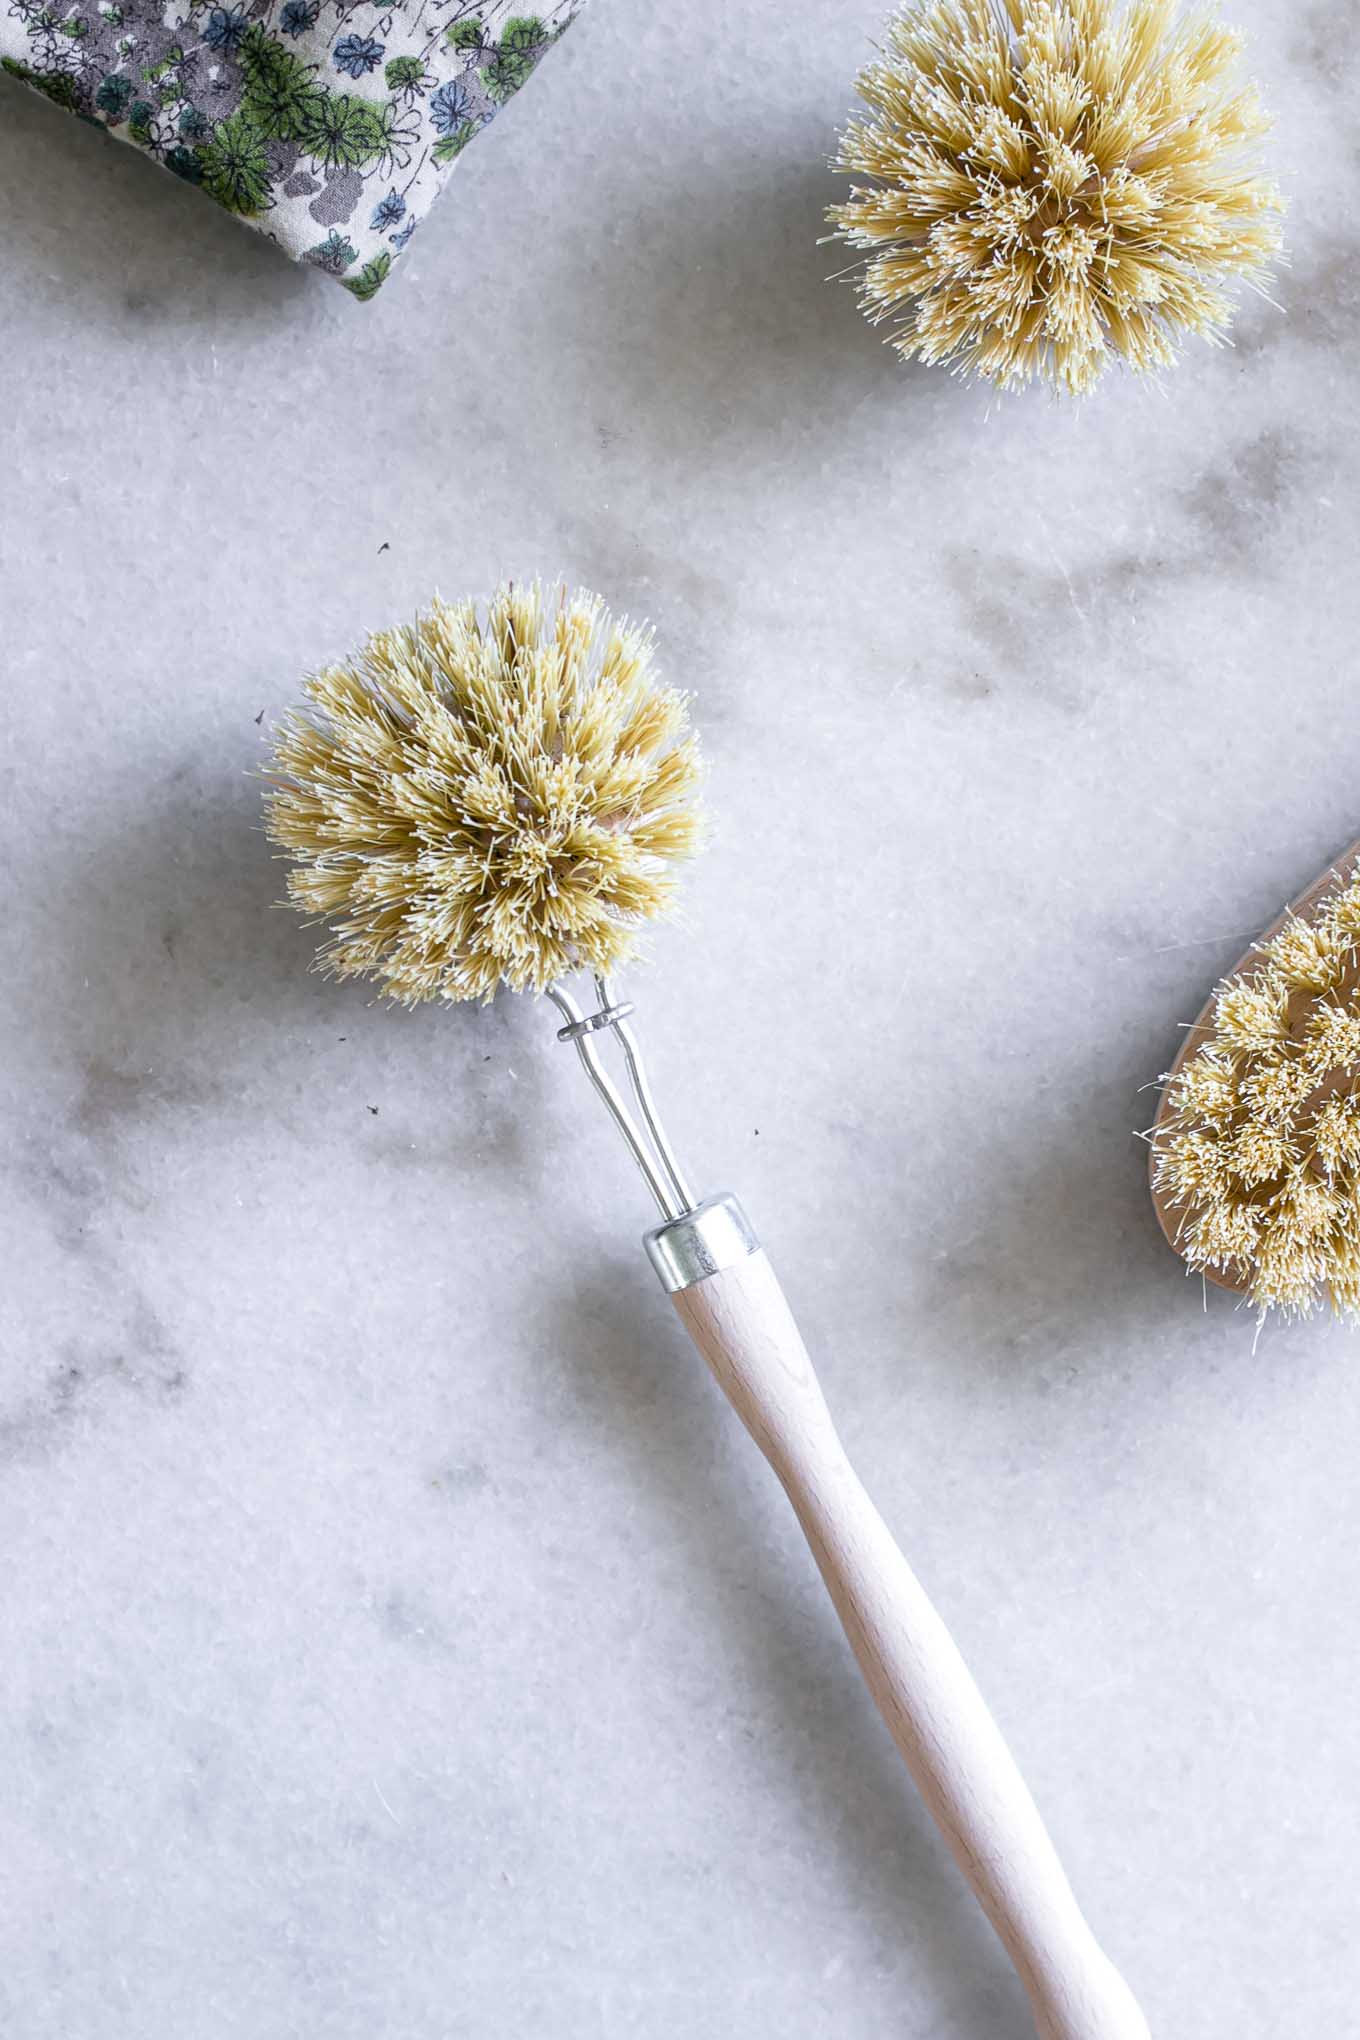 6 Eco-Friendly Alternatives to Kitchen Sponges ⋆ Fork in the Road